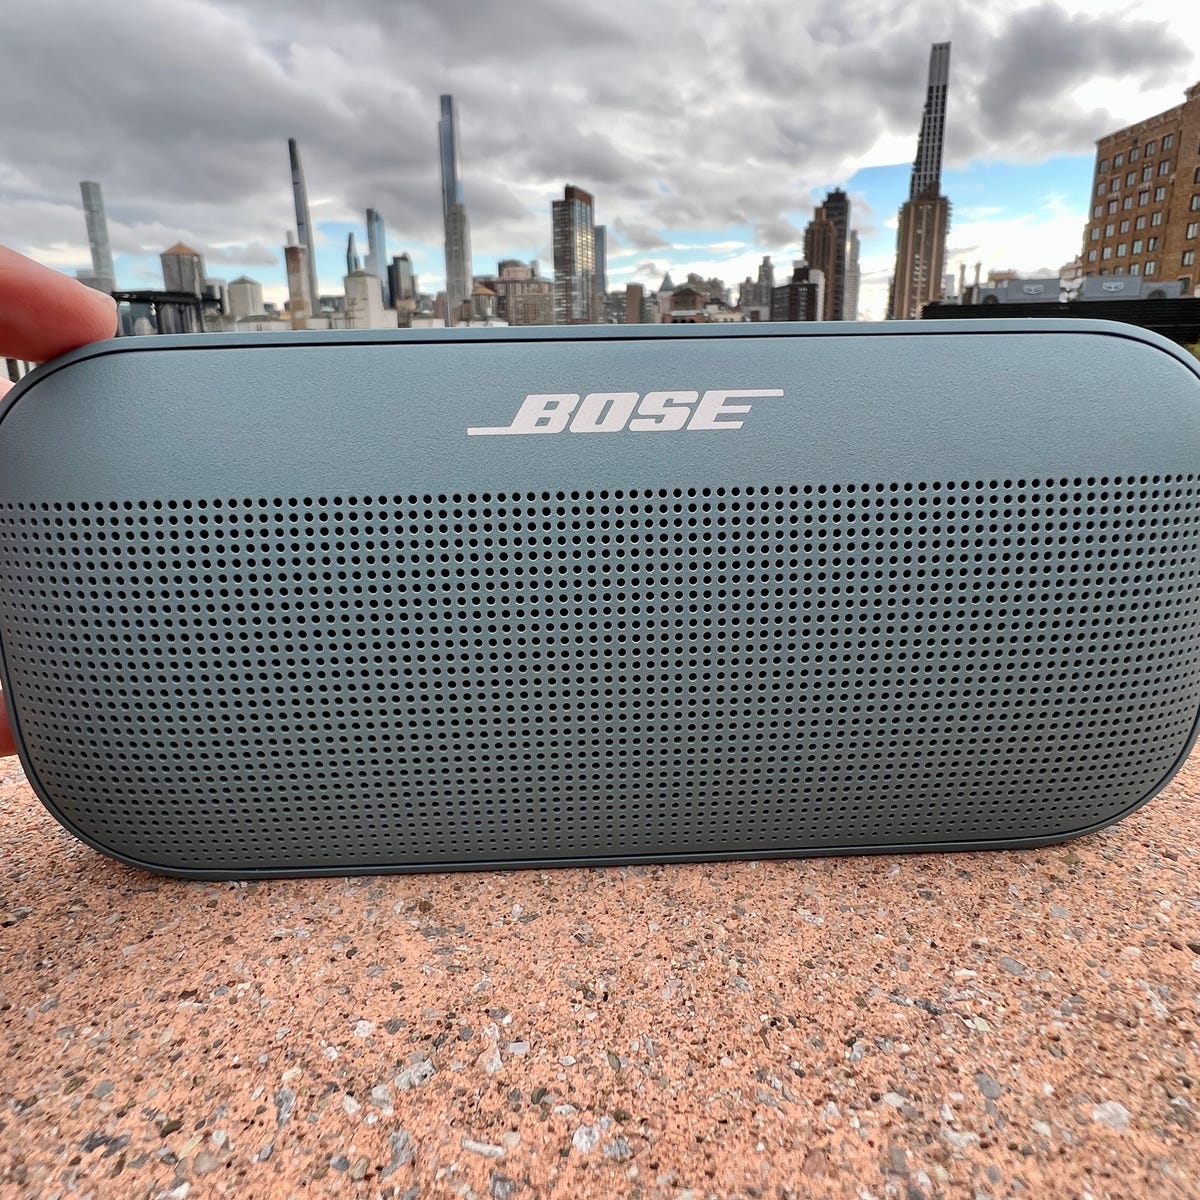 Met andere bands schoolbord Rauw Bose SoundLink Flex review: Best mini Bluetooth speaker you can buy right  now - CNET